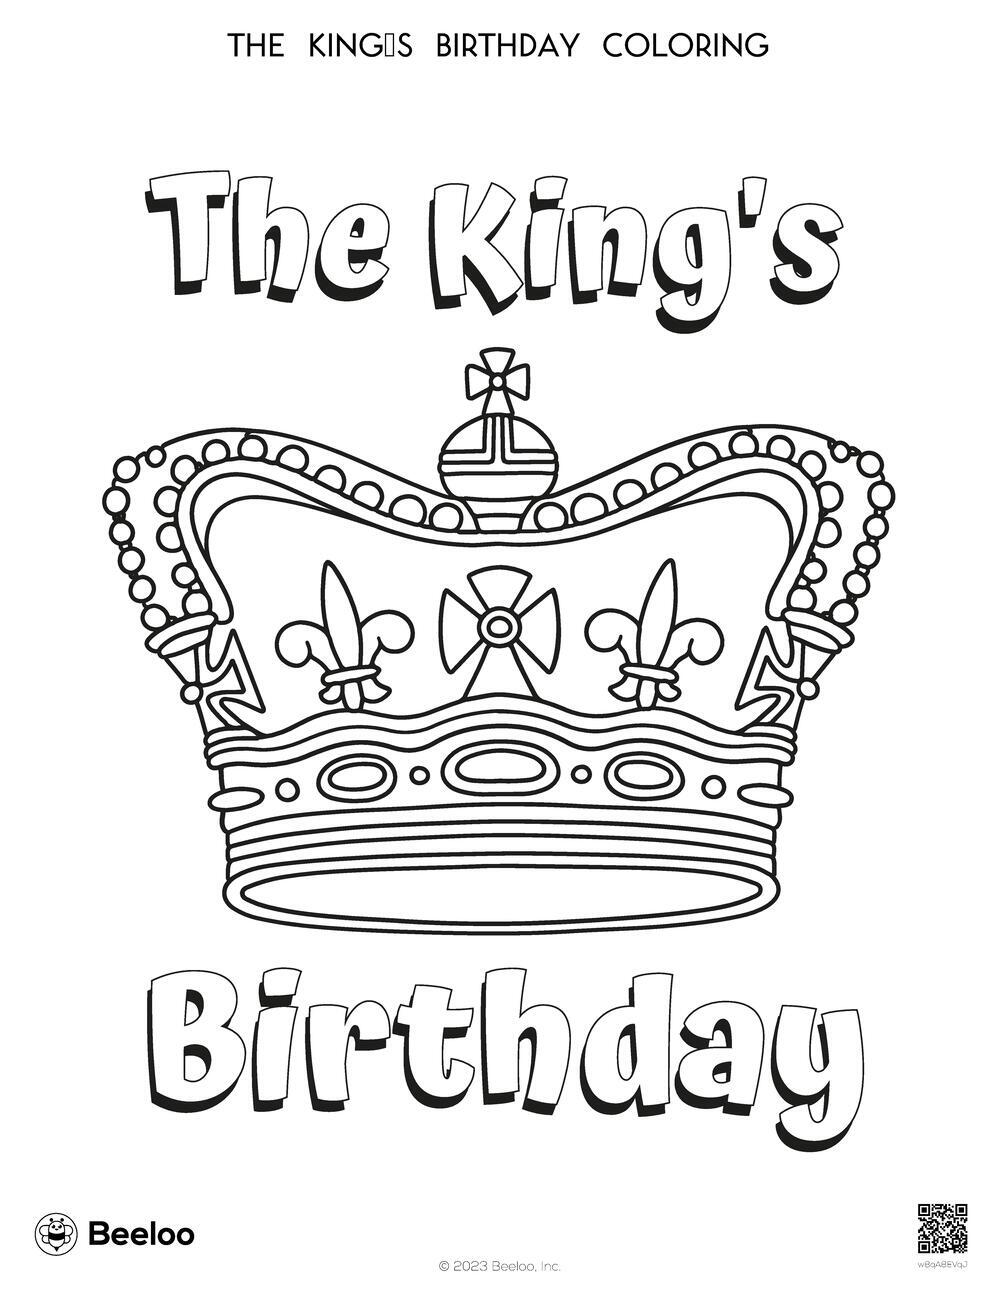 The kings birthday coloring â printable crafts and activities for kids